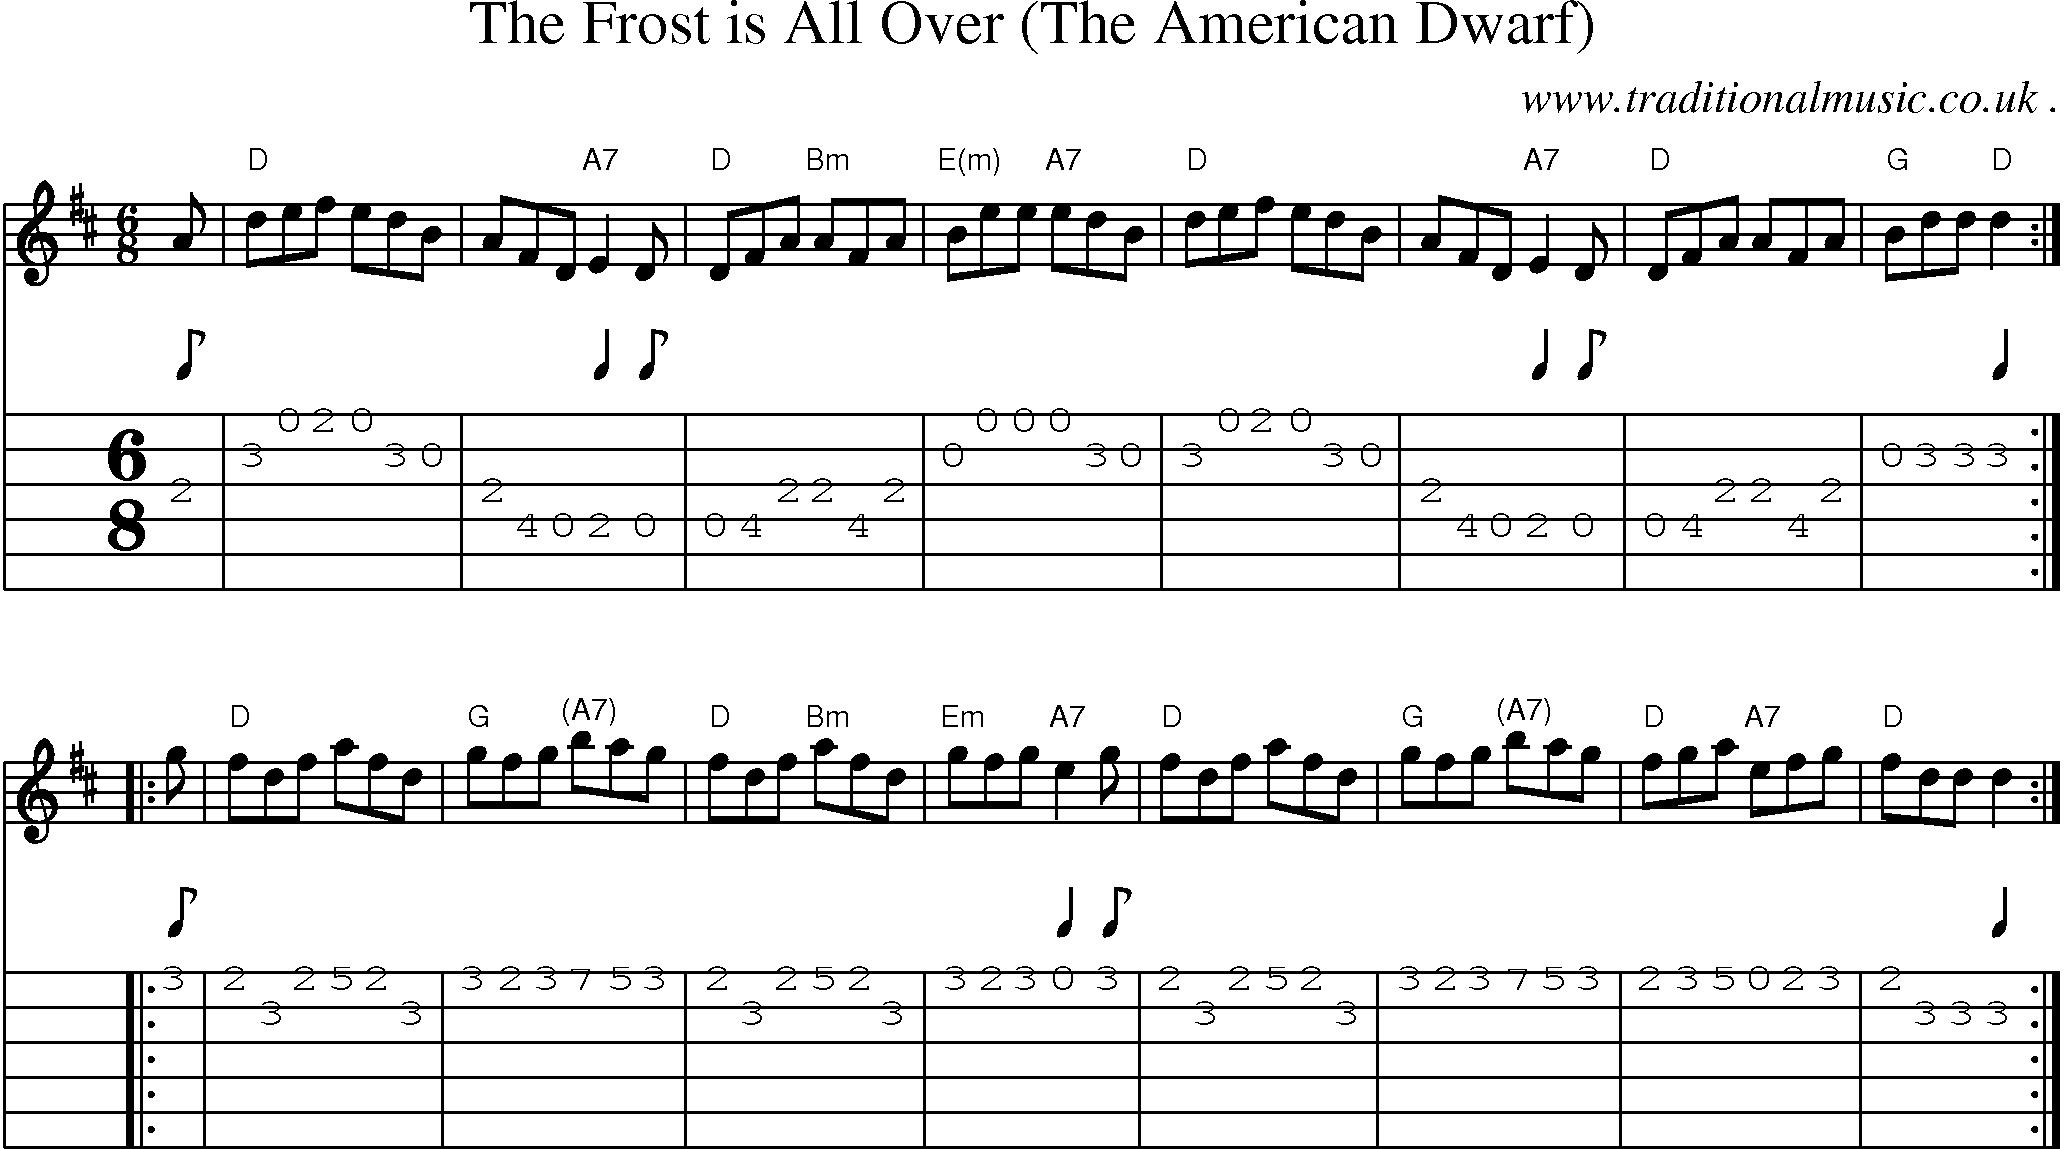 Sheet-music  score, Chords and Guitar Tabs for The Frost Is All Over The American Dwarf